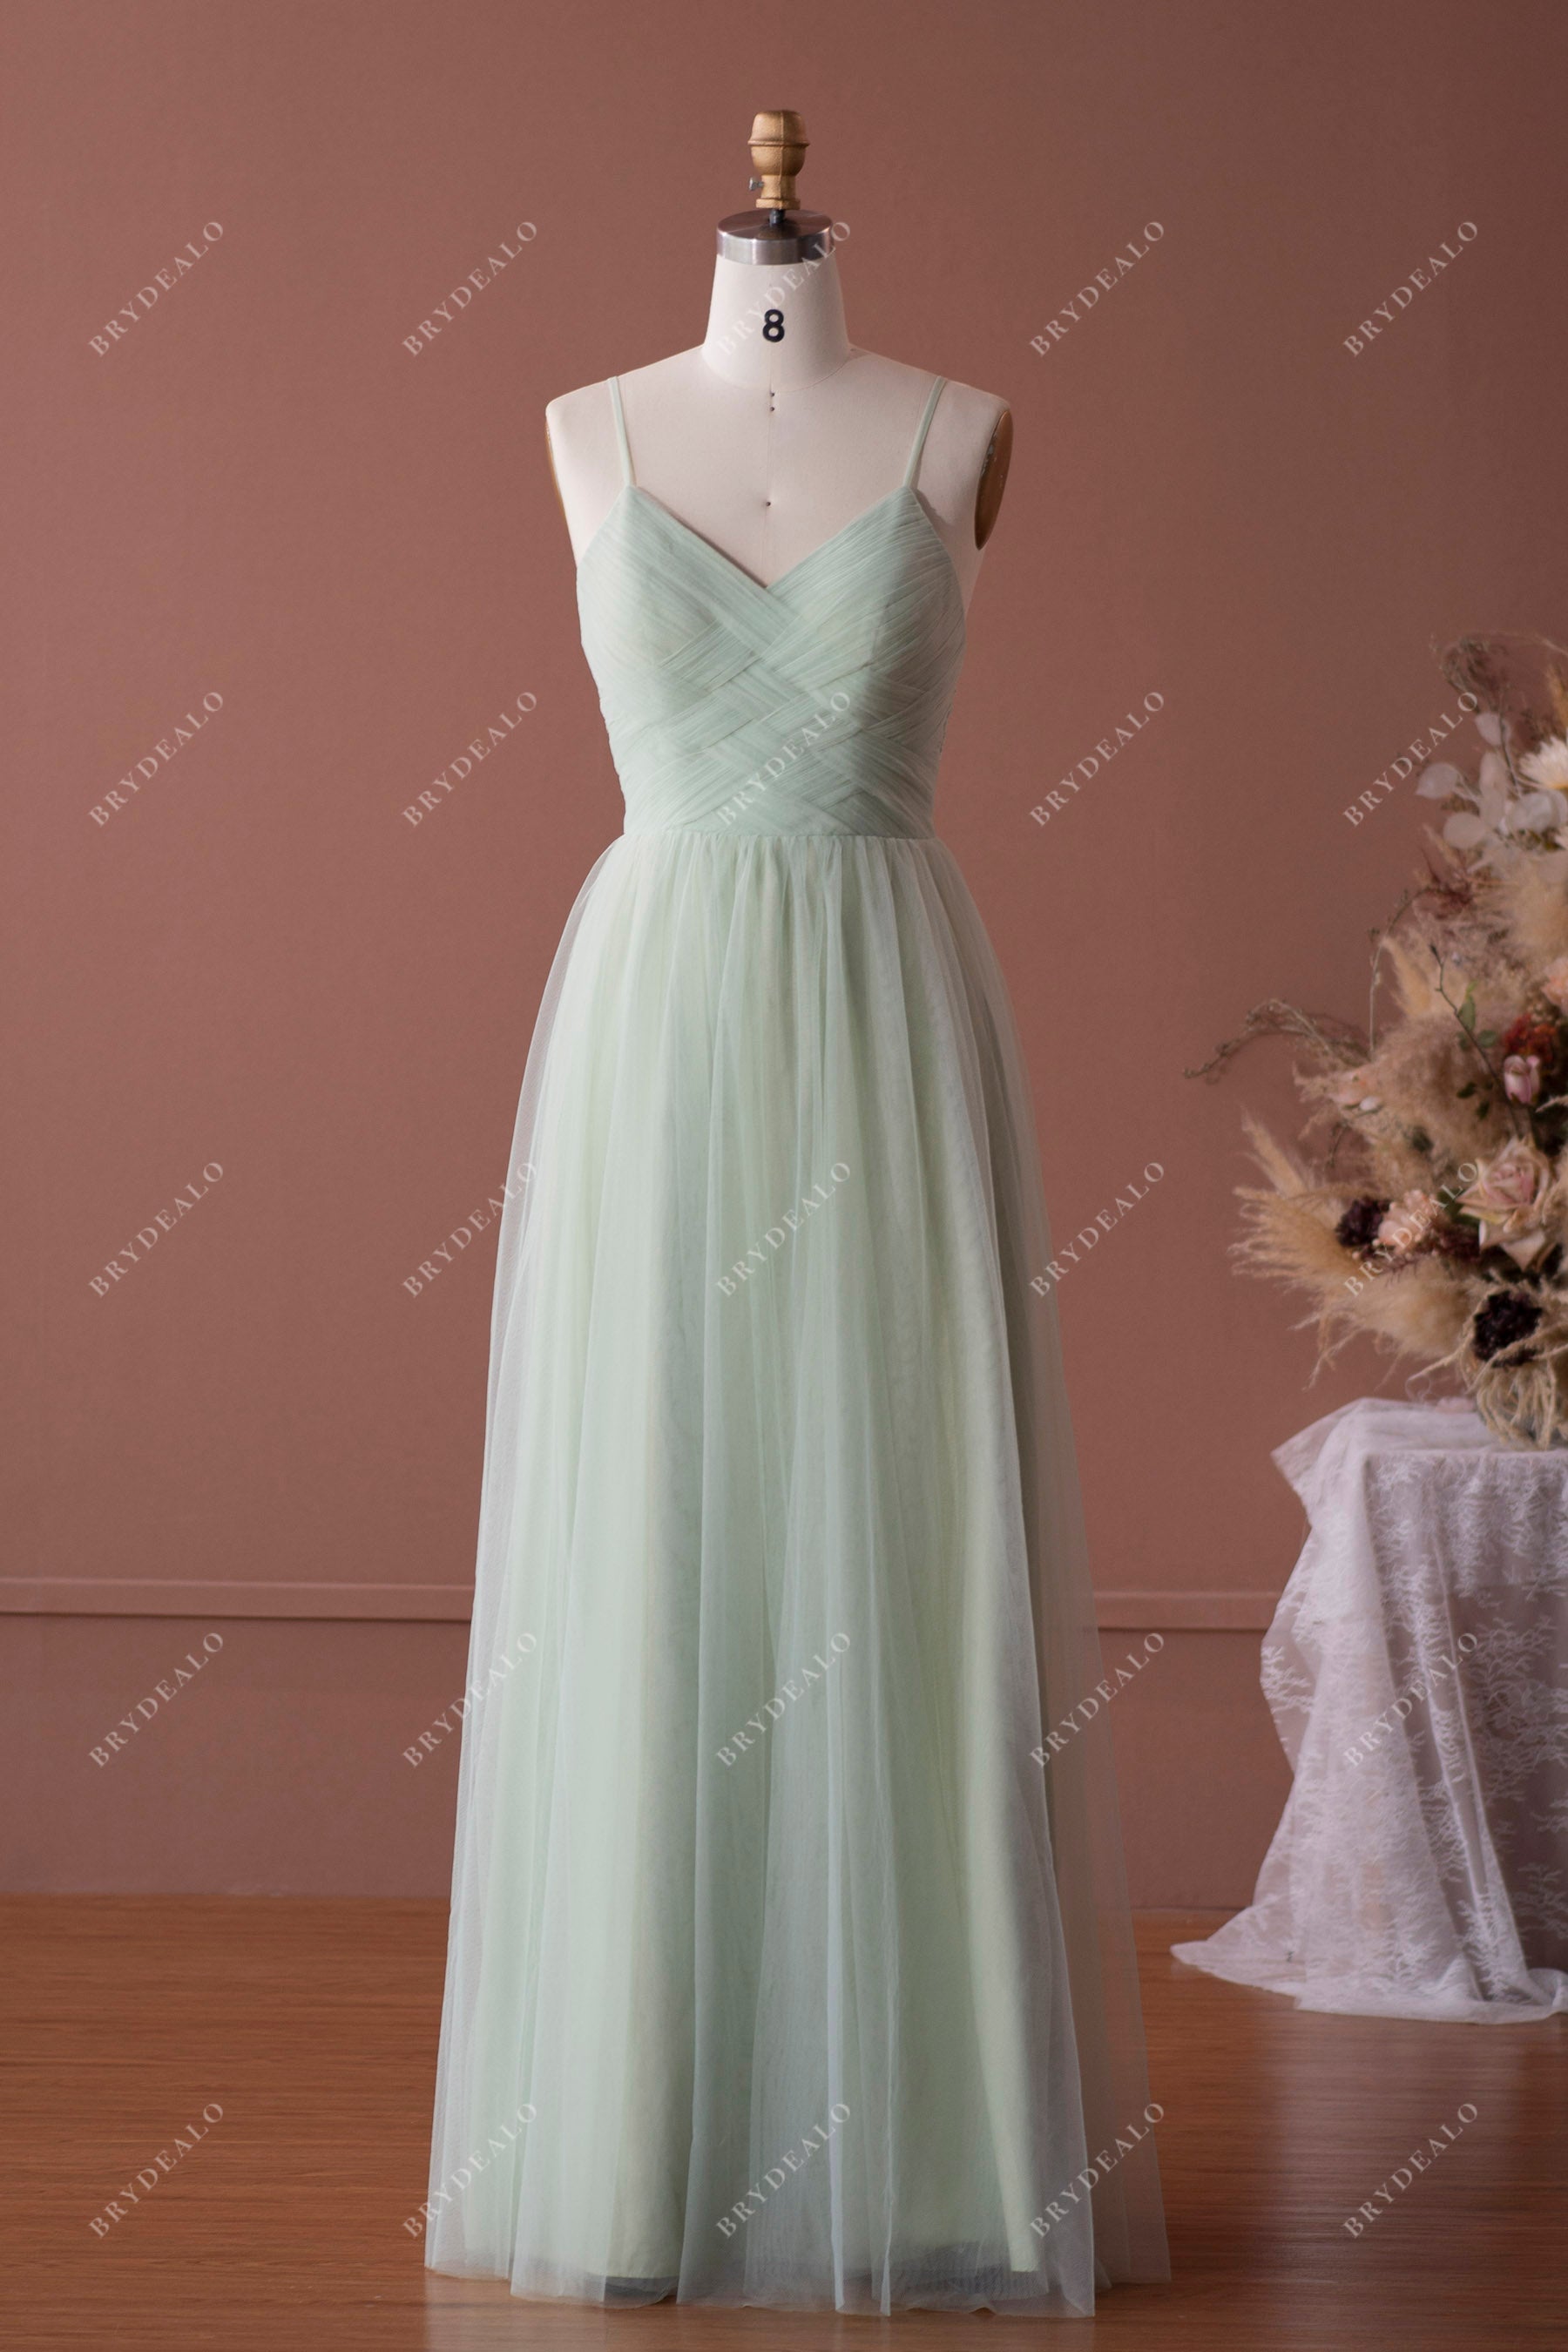 Mint Green Lace Tulle Thin Strap Weave Bridesmaid Dress Sample Sale